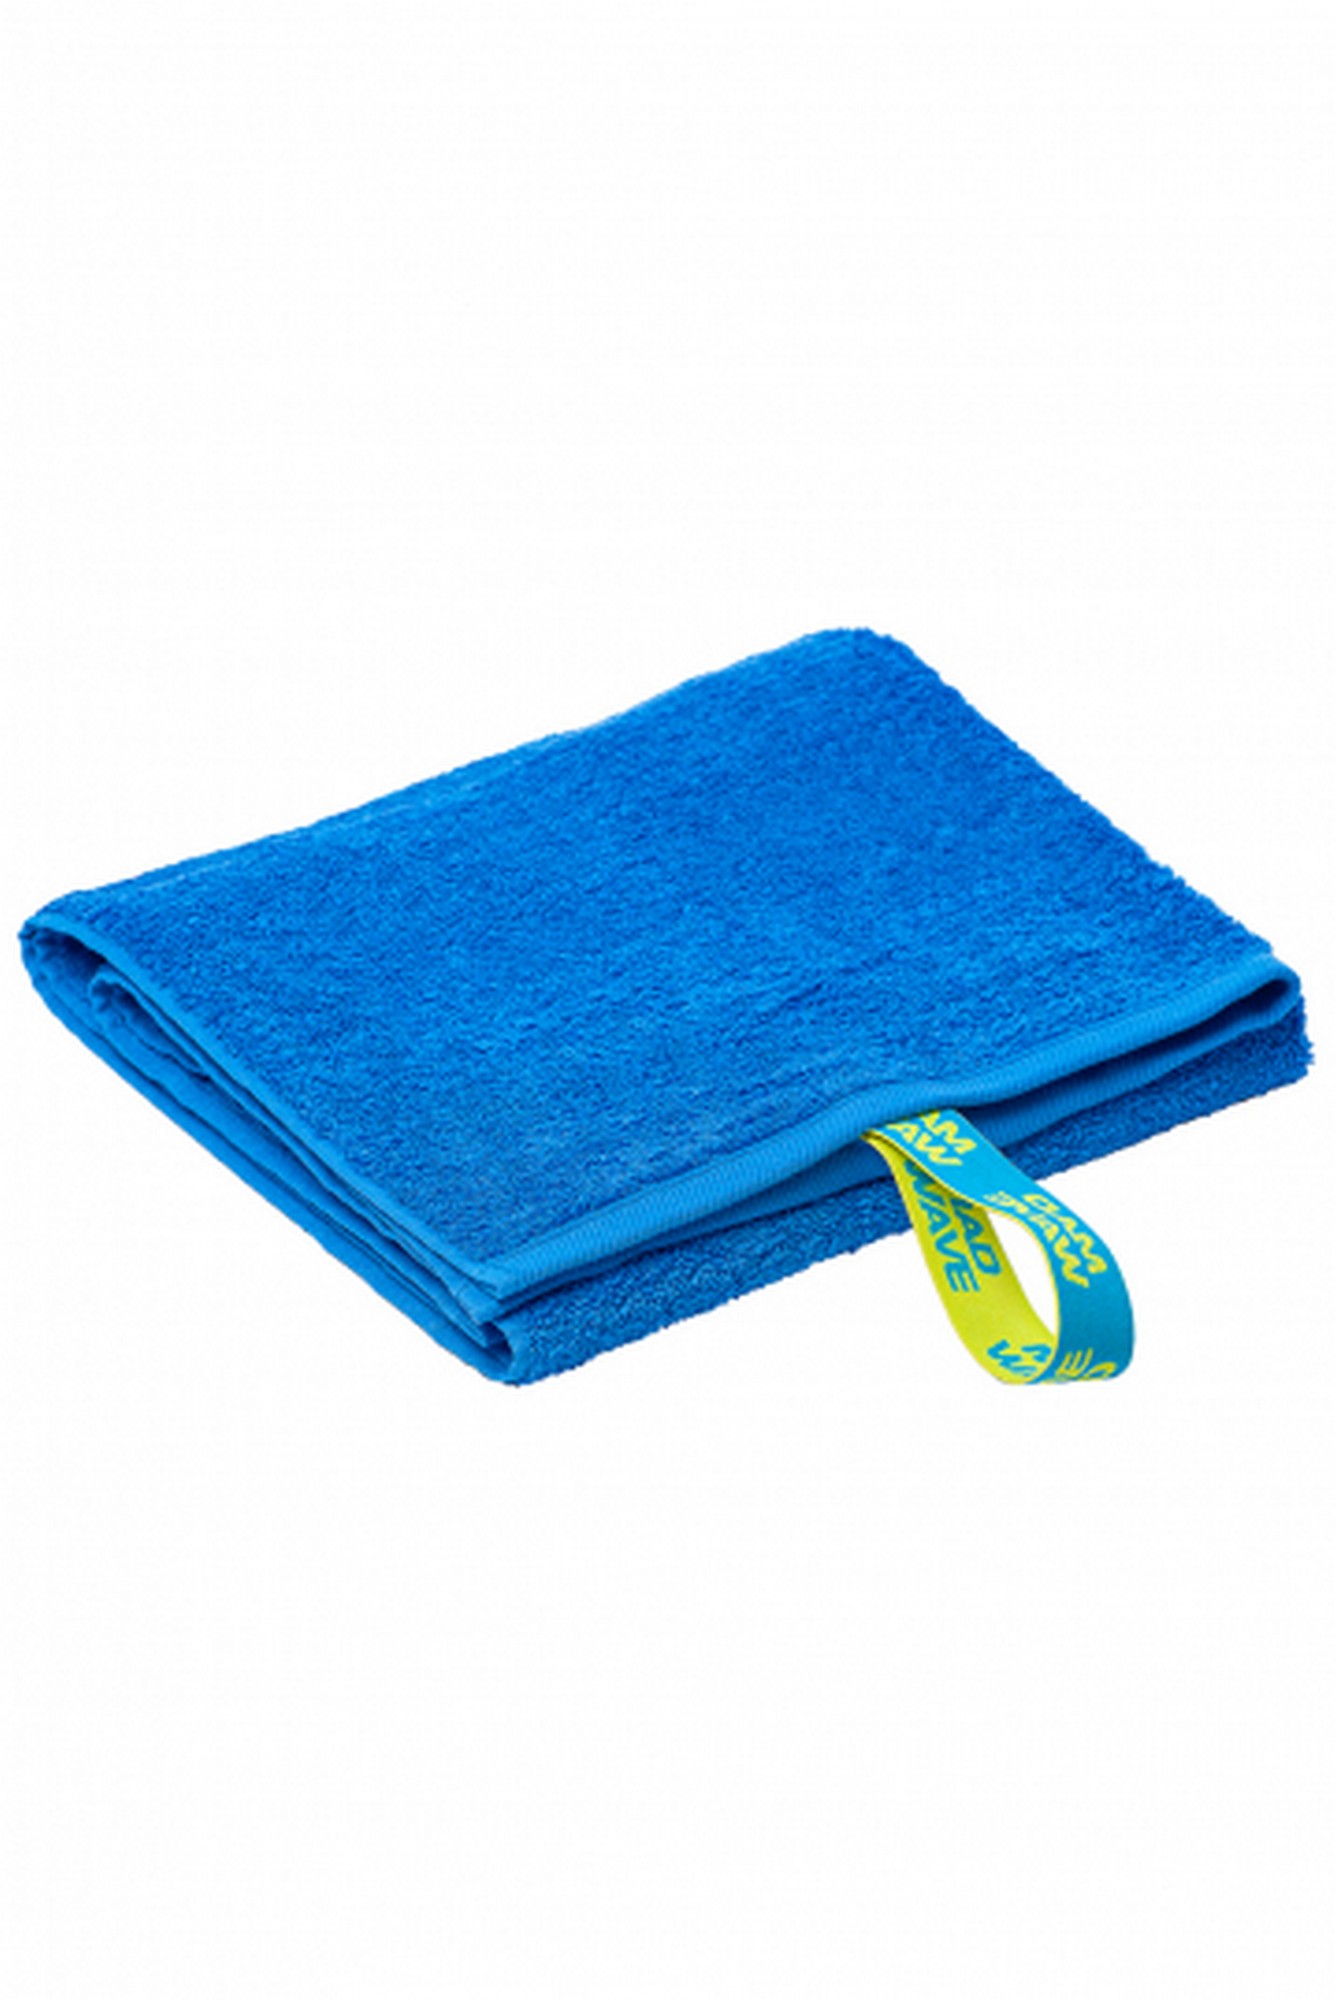  Mad Wave Cotton Sort Terry Towel M0762 01 2 04W 